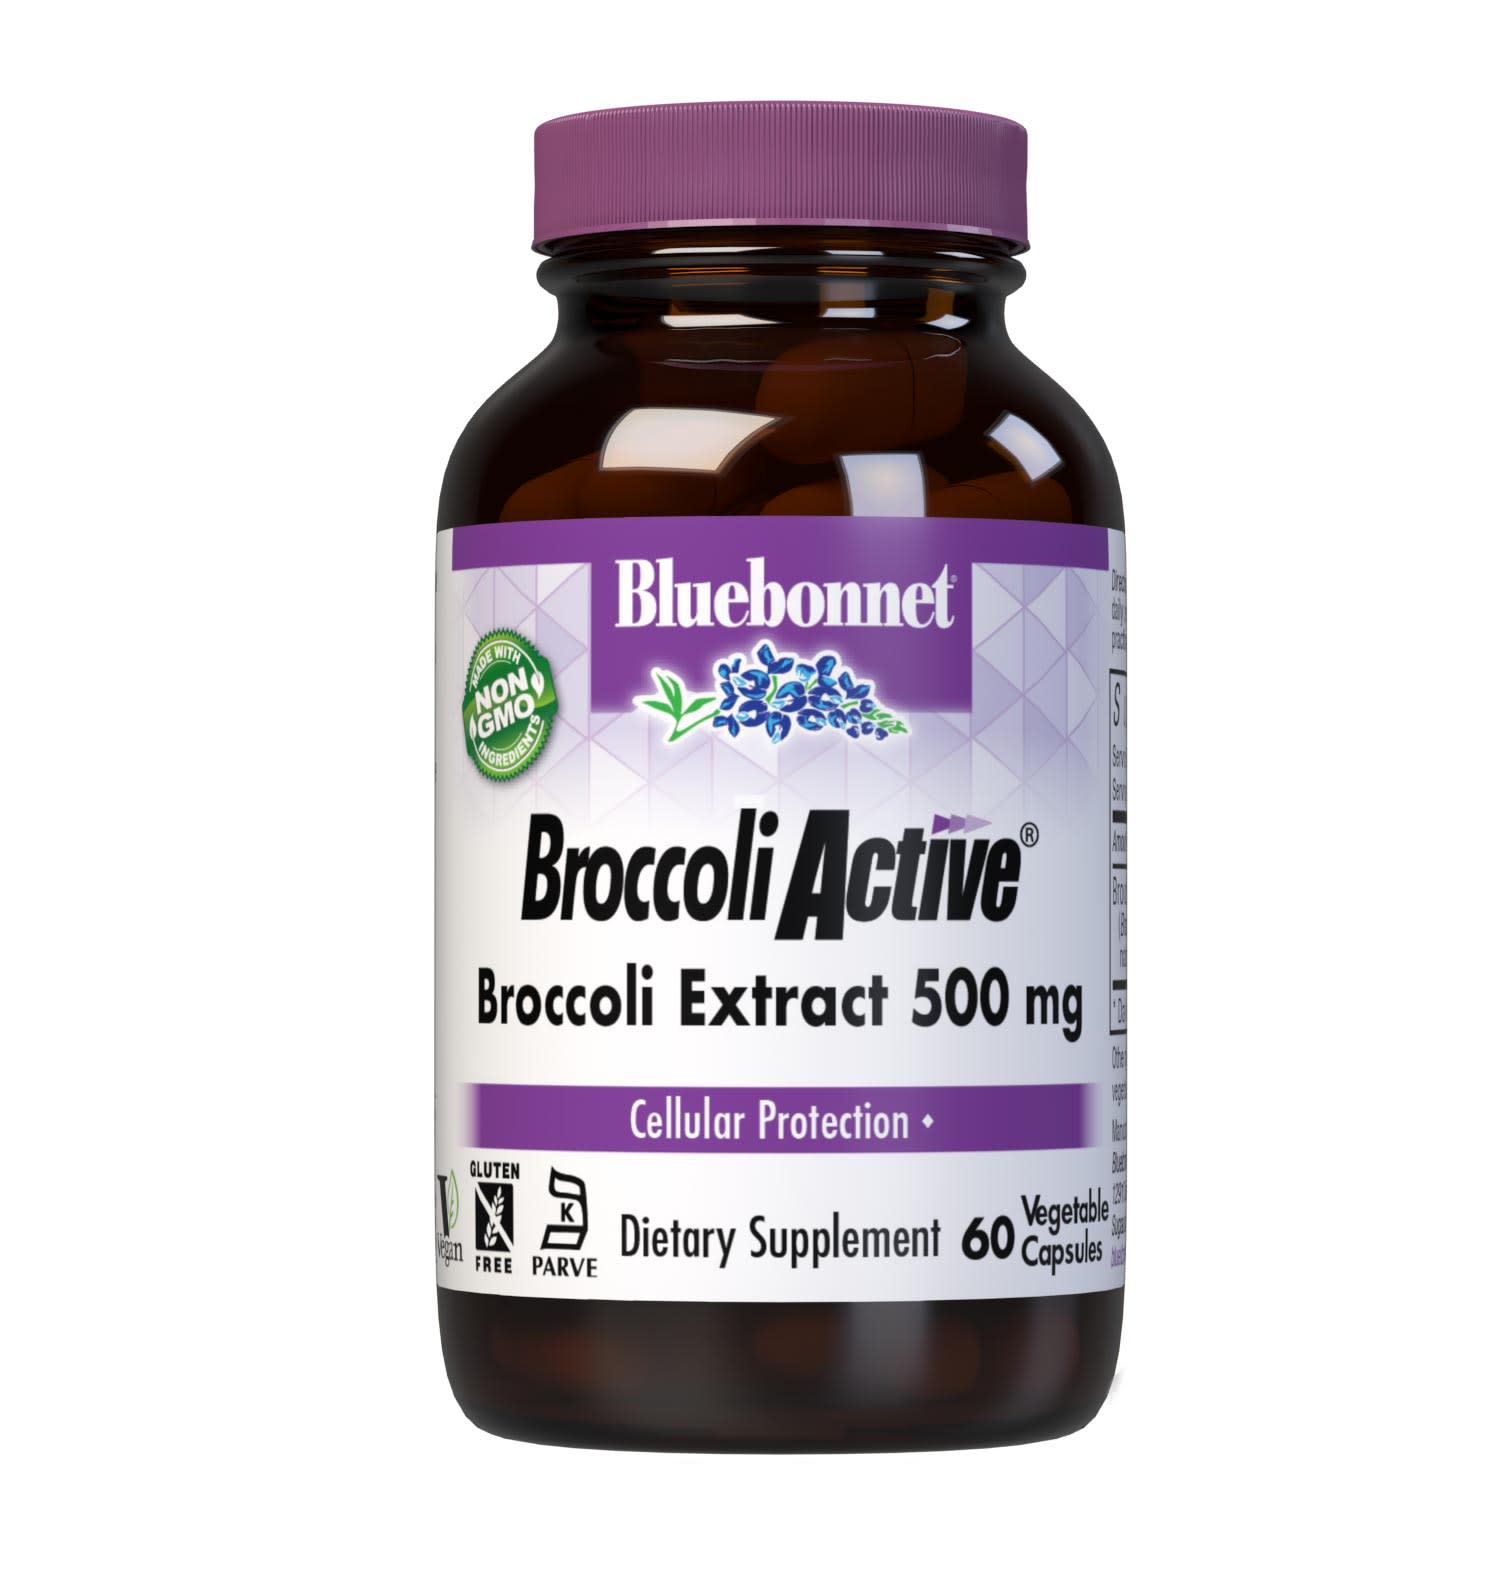 Bluebonnet’s Broccoli Active 500 mg 60 Vegetable Capsules are formulated with sulforaphane glucosinolates from the broccoli plant, sprouts and seeds, which provide powerful cellular protective benefits. #size_60 count